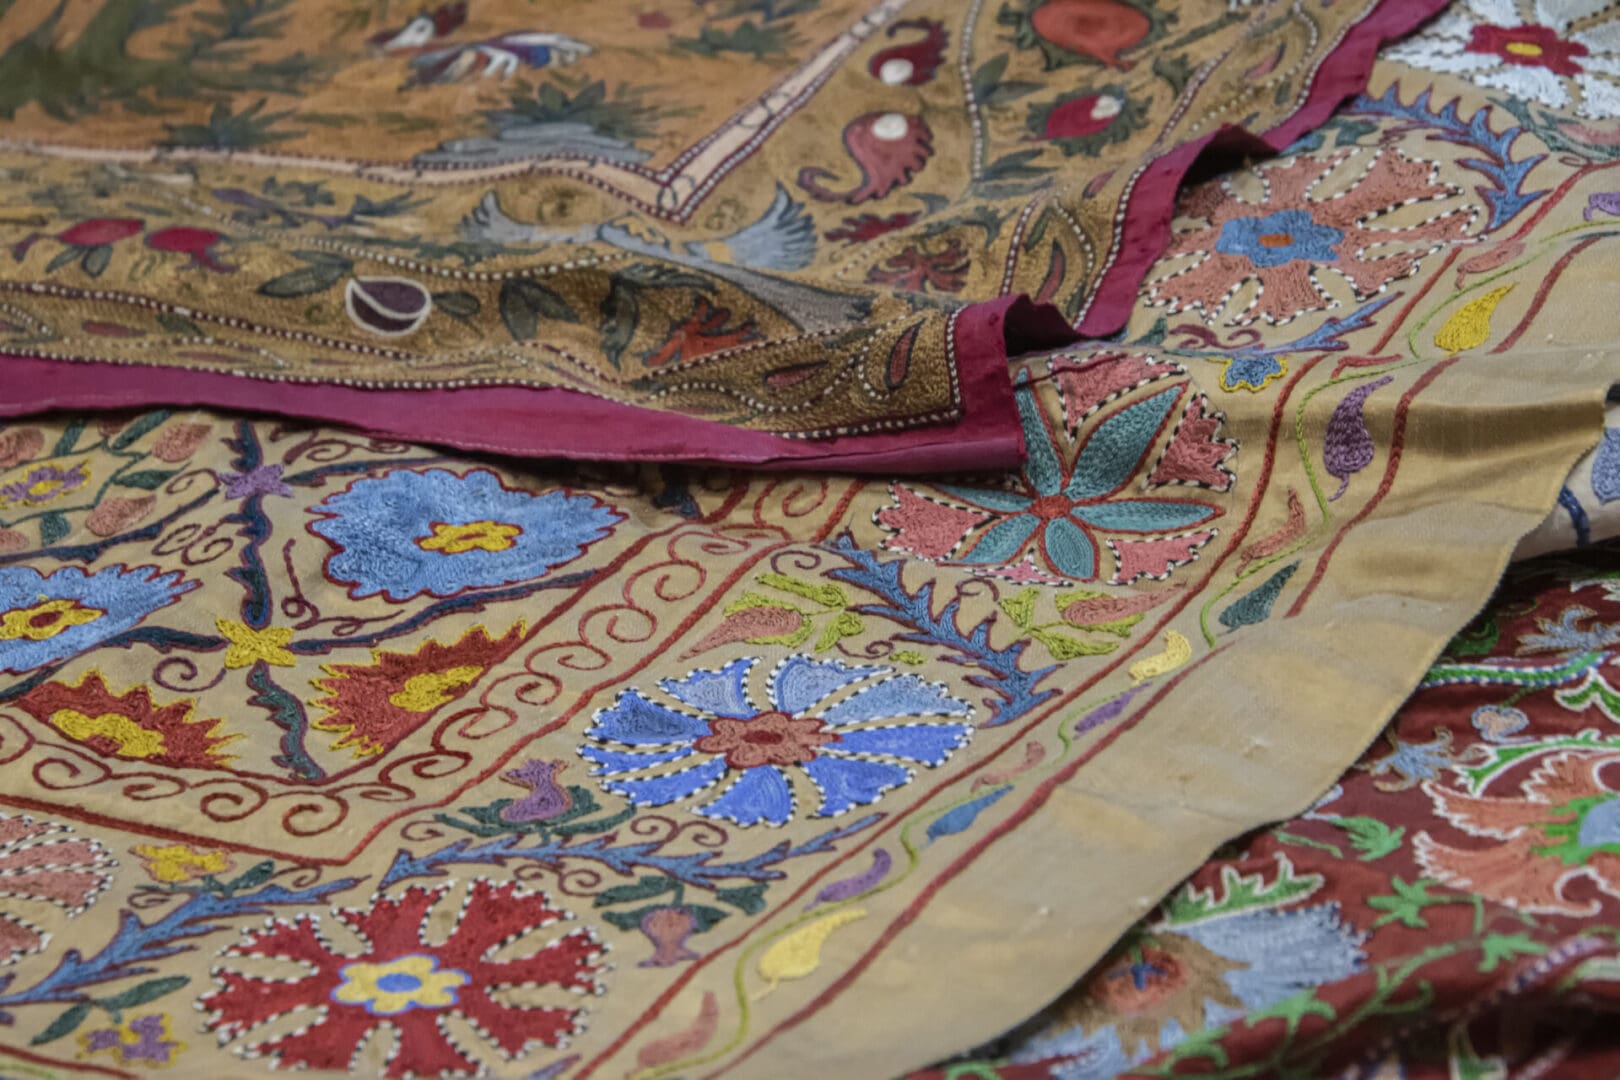 A group of colorful embroidered cloths on a table.